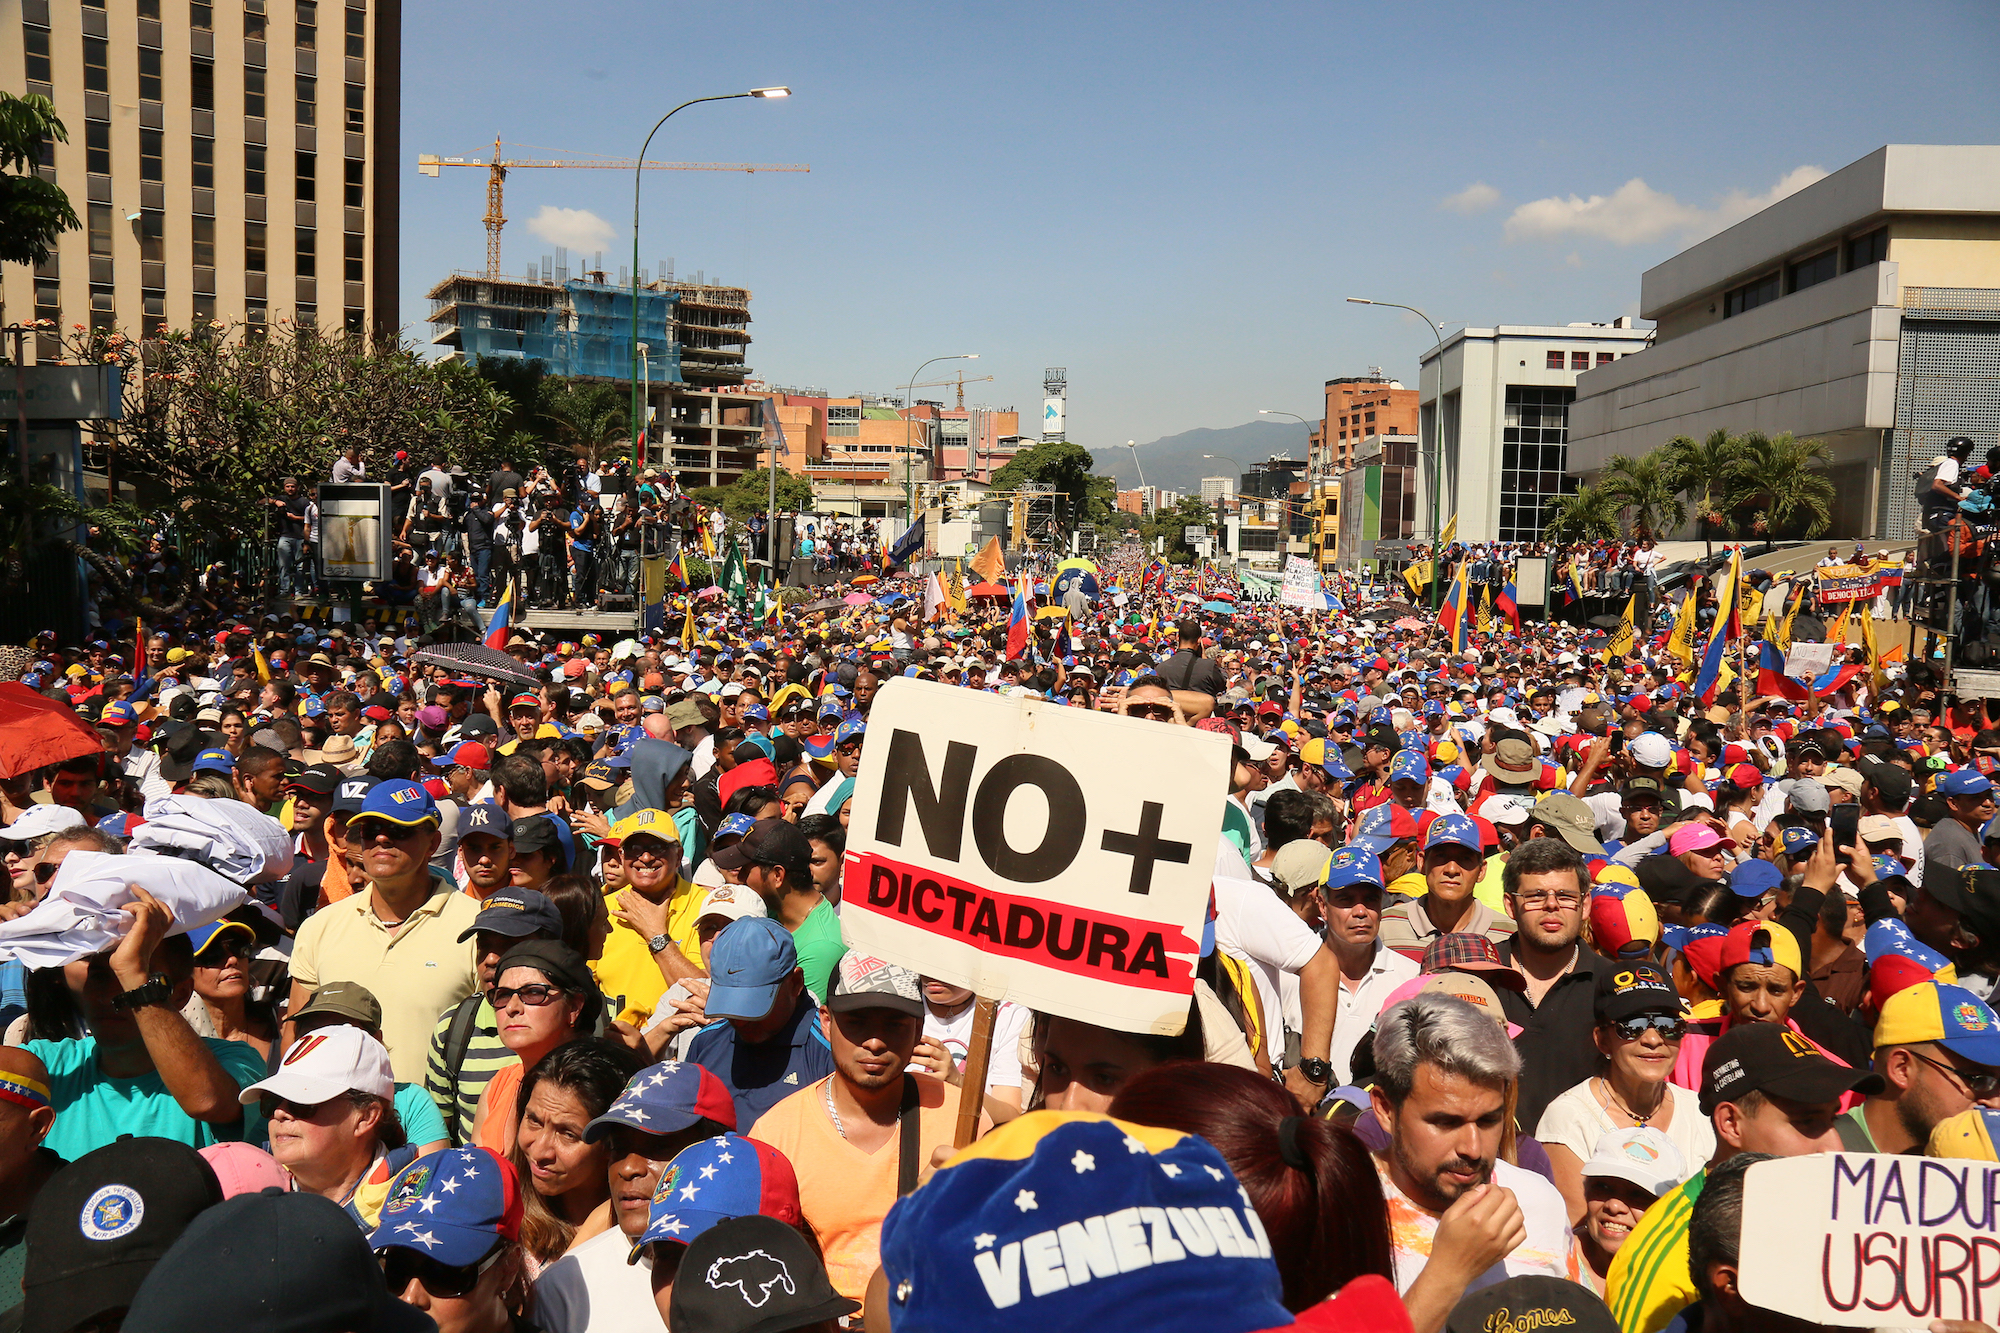 Demonstrators protest against the government of Nicolas Maduro on the main avenue of Las Mercedes, municipality of Baruta, on Feb. 2, 2019 in Caracas, Venezuela. (Edilzon Gamez/Getty Images)